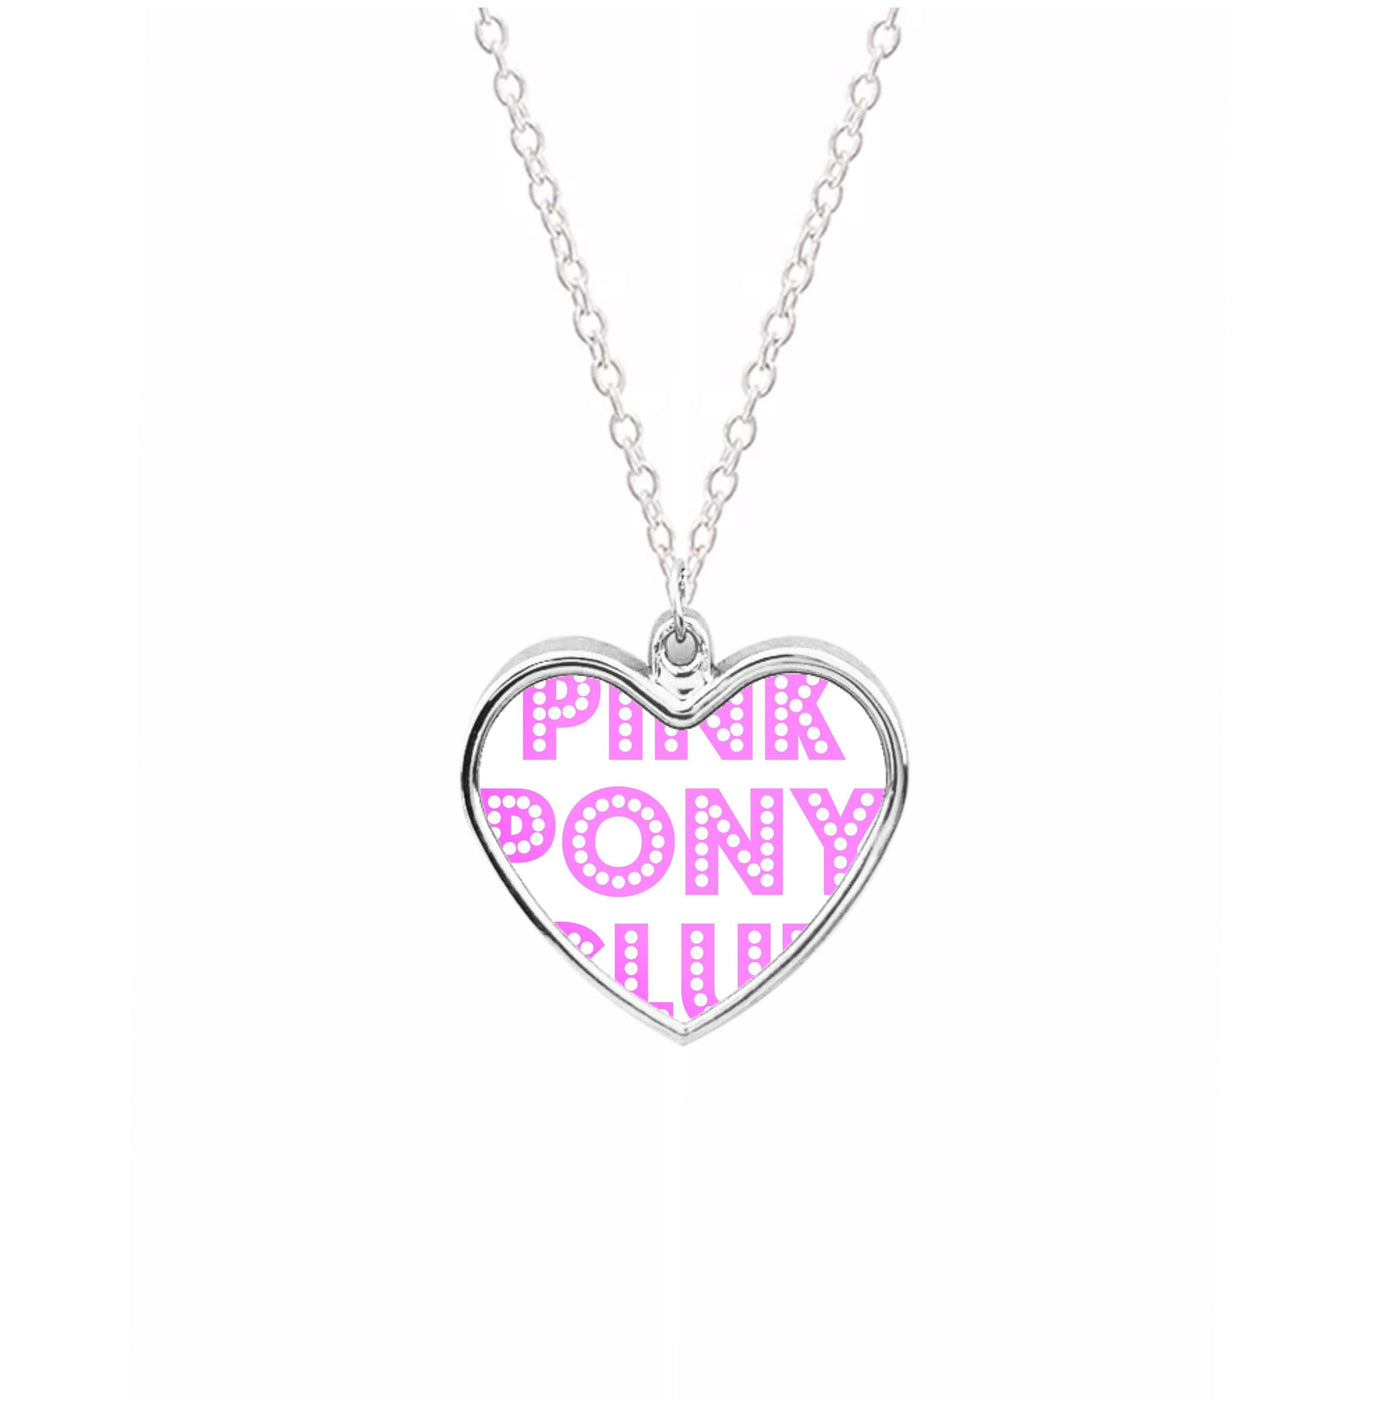 Pink Pony Club - Chappell Roan Necklace